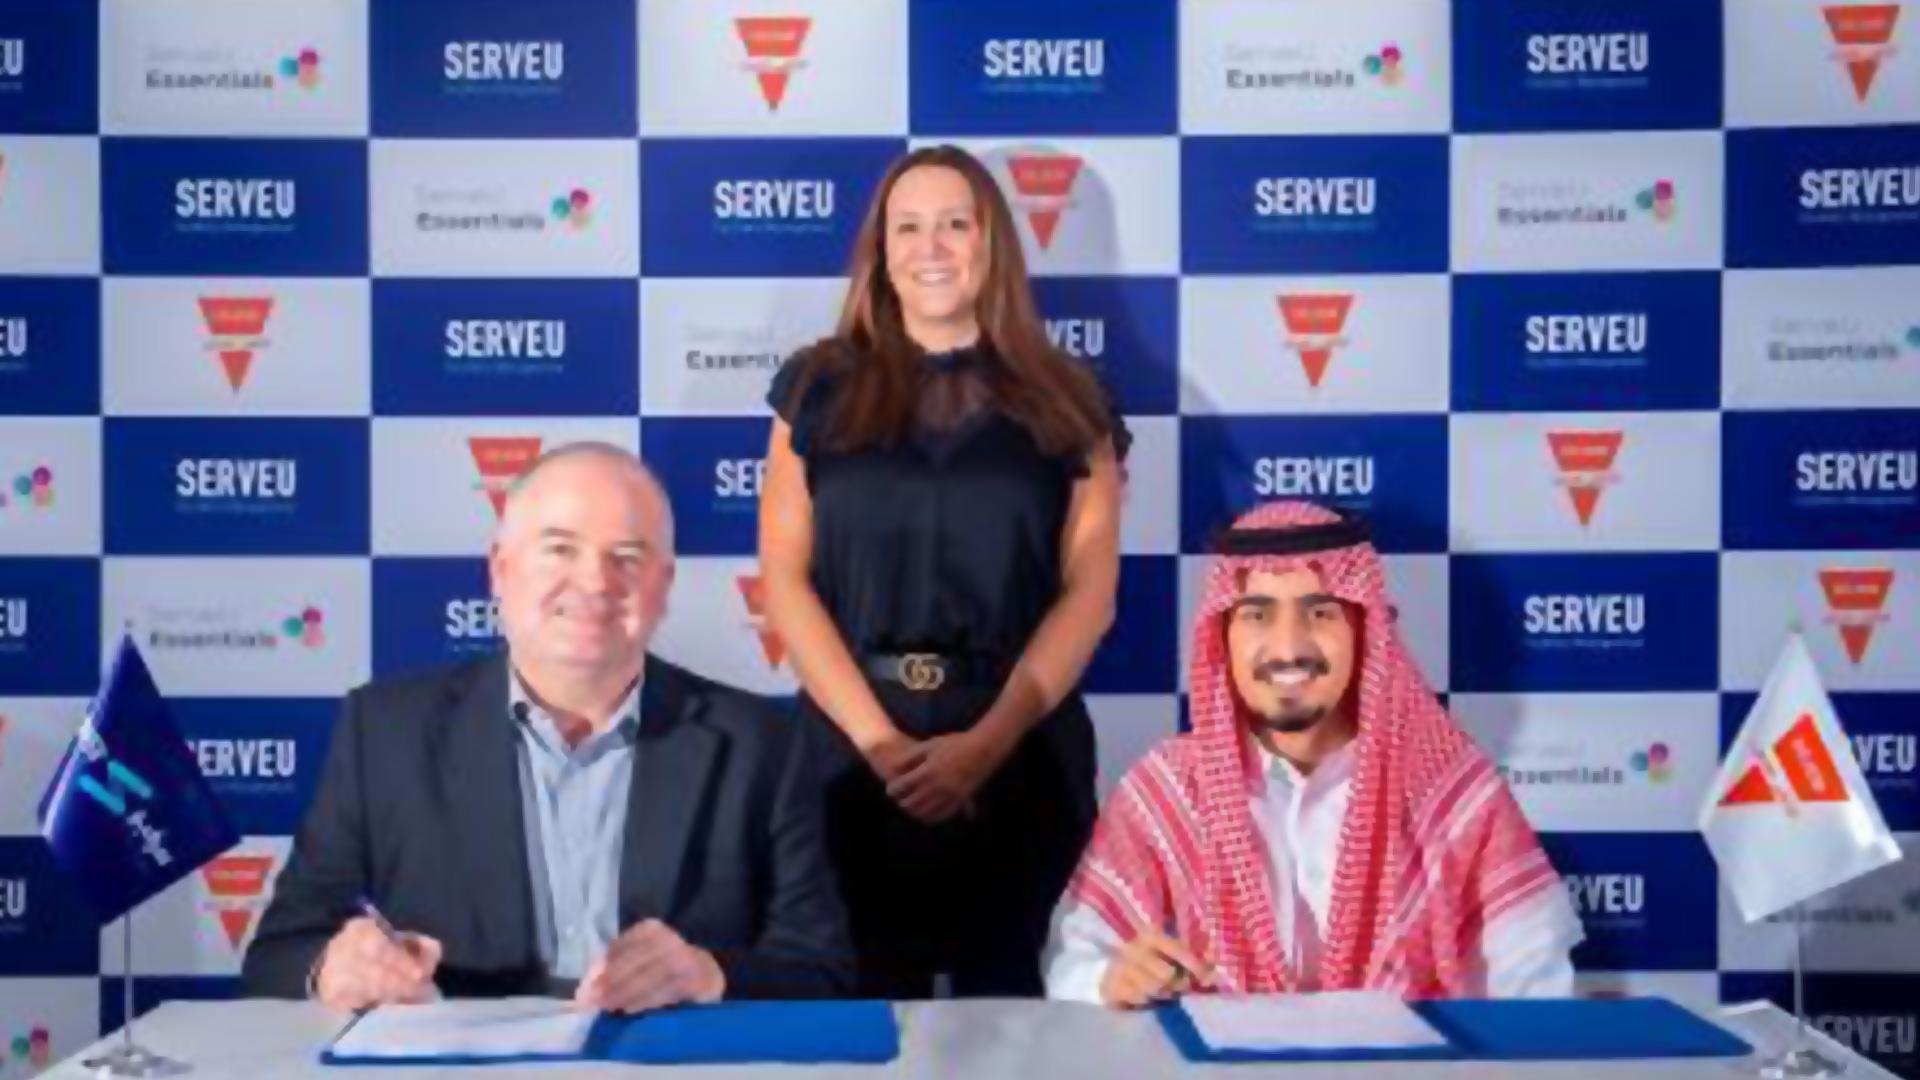 ServeU essentials to provide facilities management services to Ayedh Hussein Bin Dejem Real Estate Group